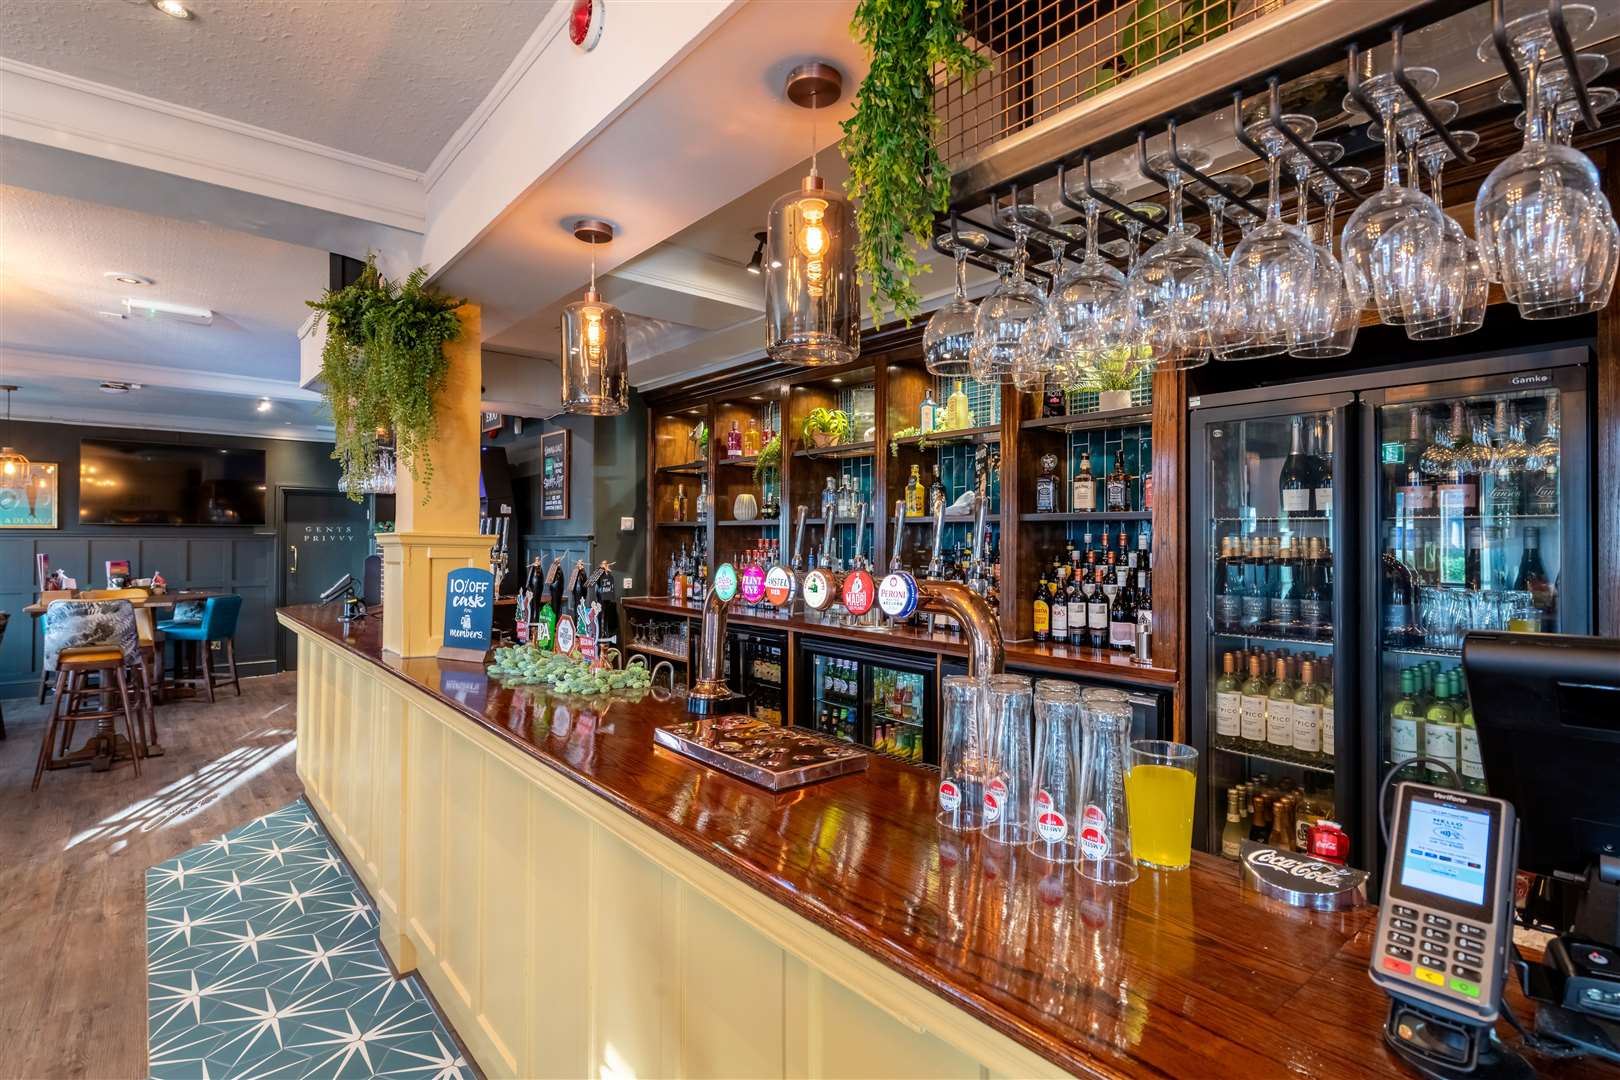 Bosses say the pub now has a "modern" look